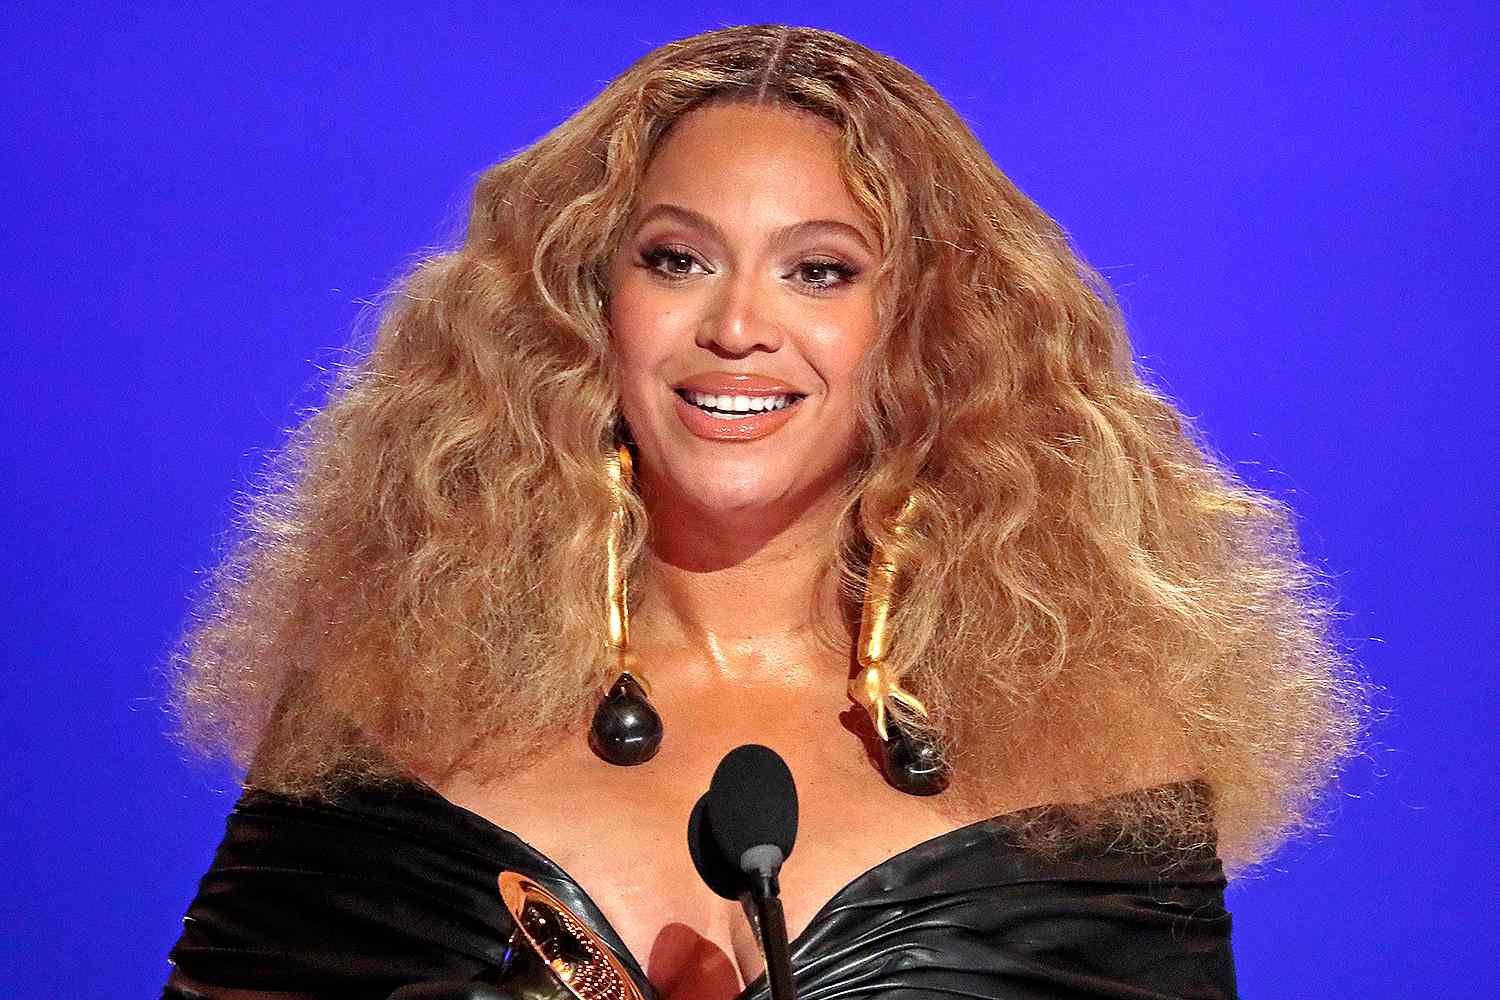 beyoncé 'honored to give back' as she announces $500,000 fund for cosmetology schools and salons nationwide